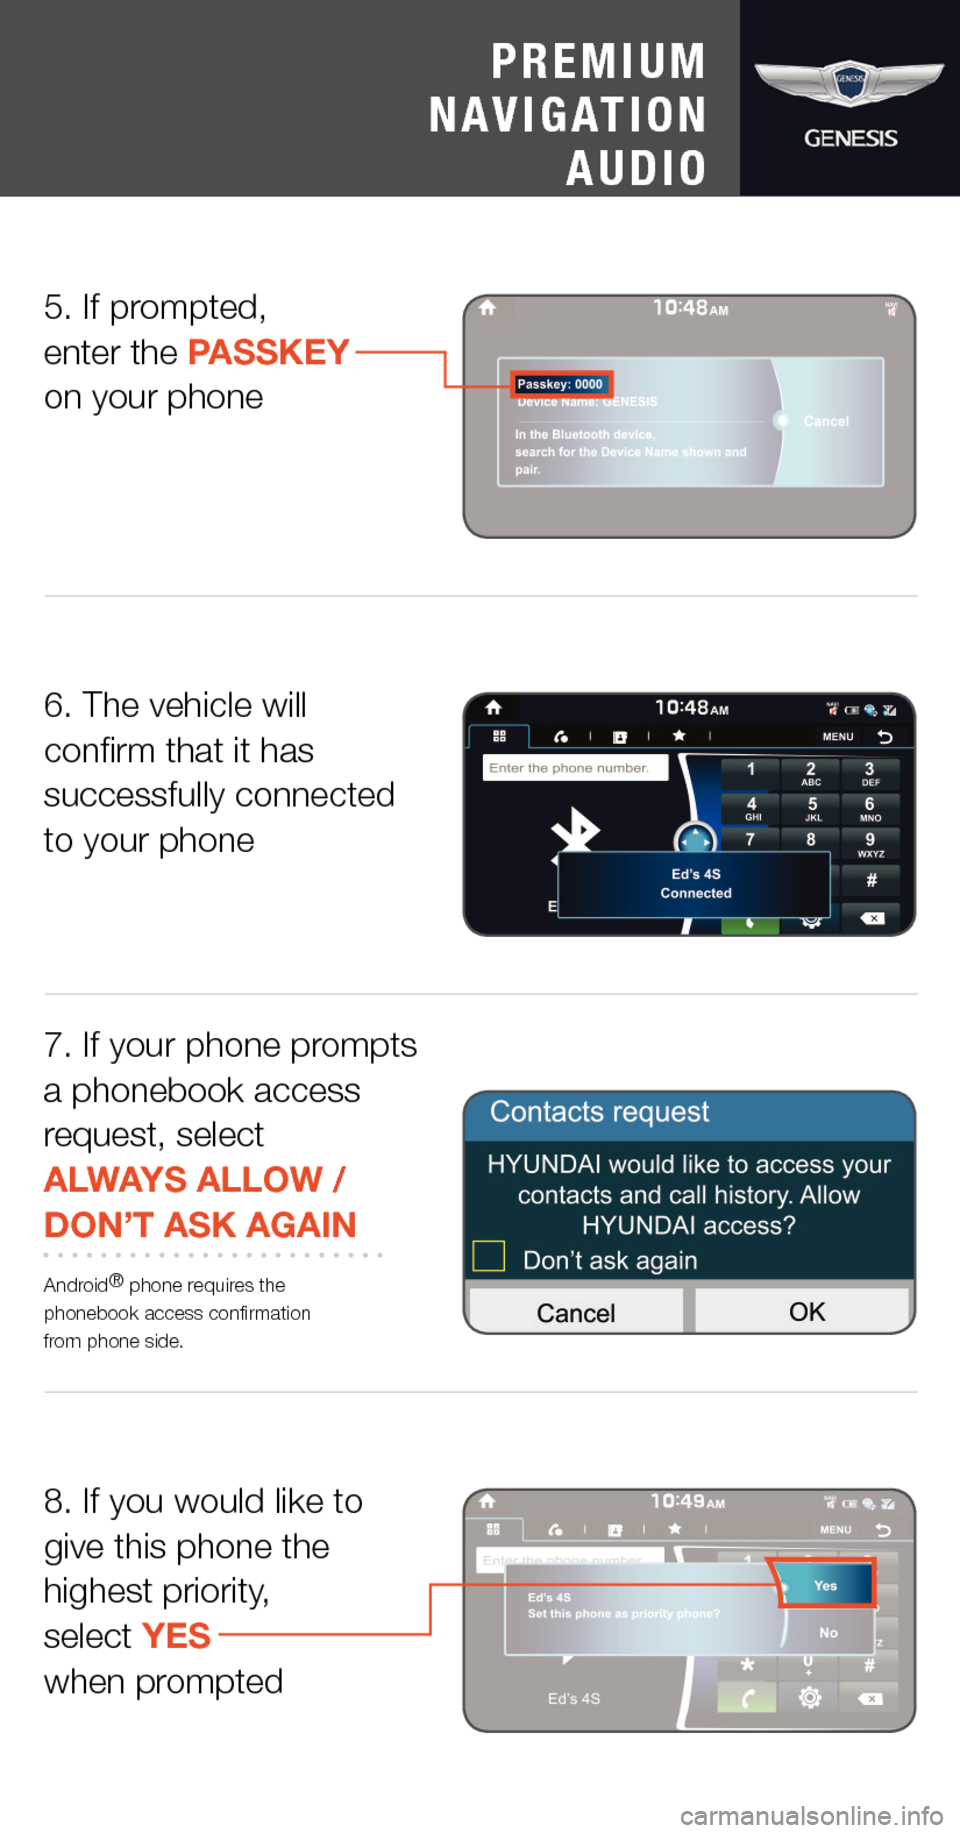 Hyundai Genesis 2015  Quick Tips 8. If you would like to give this phone the highest priority, select YES when prompted
5. If prompted,  enter the PASSKEY  on your phone
6. The vehicle will confirm that it has successfully connected 